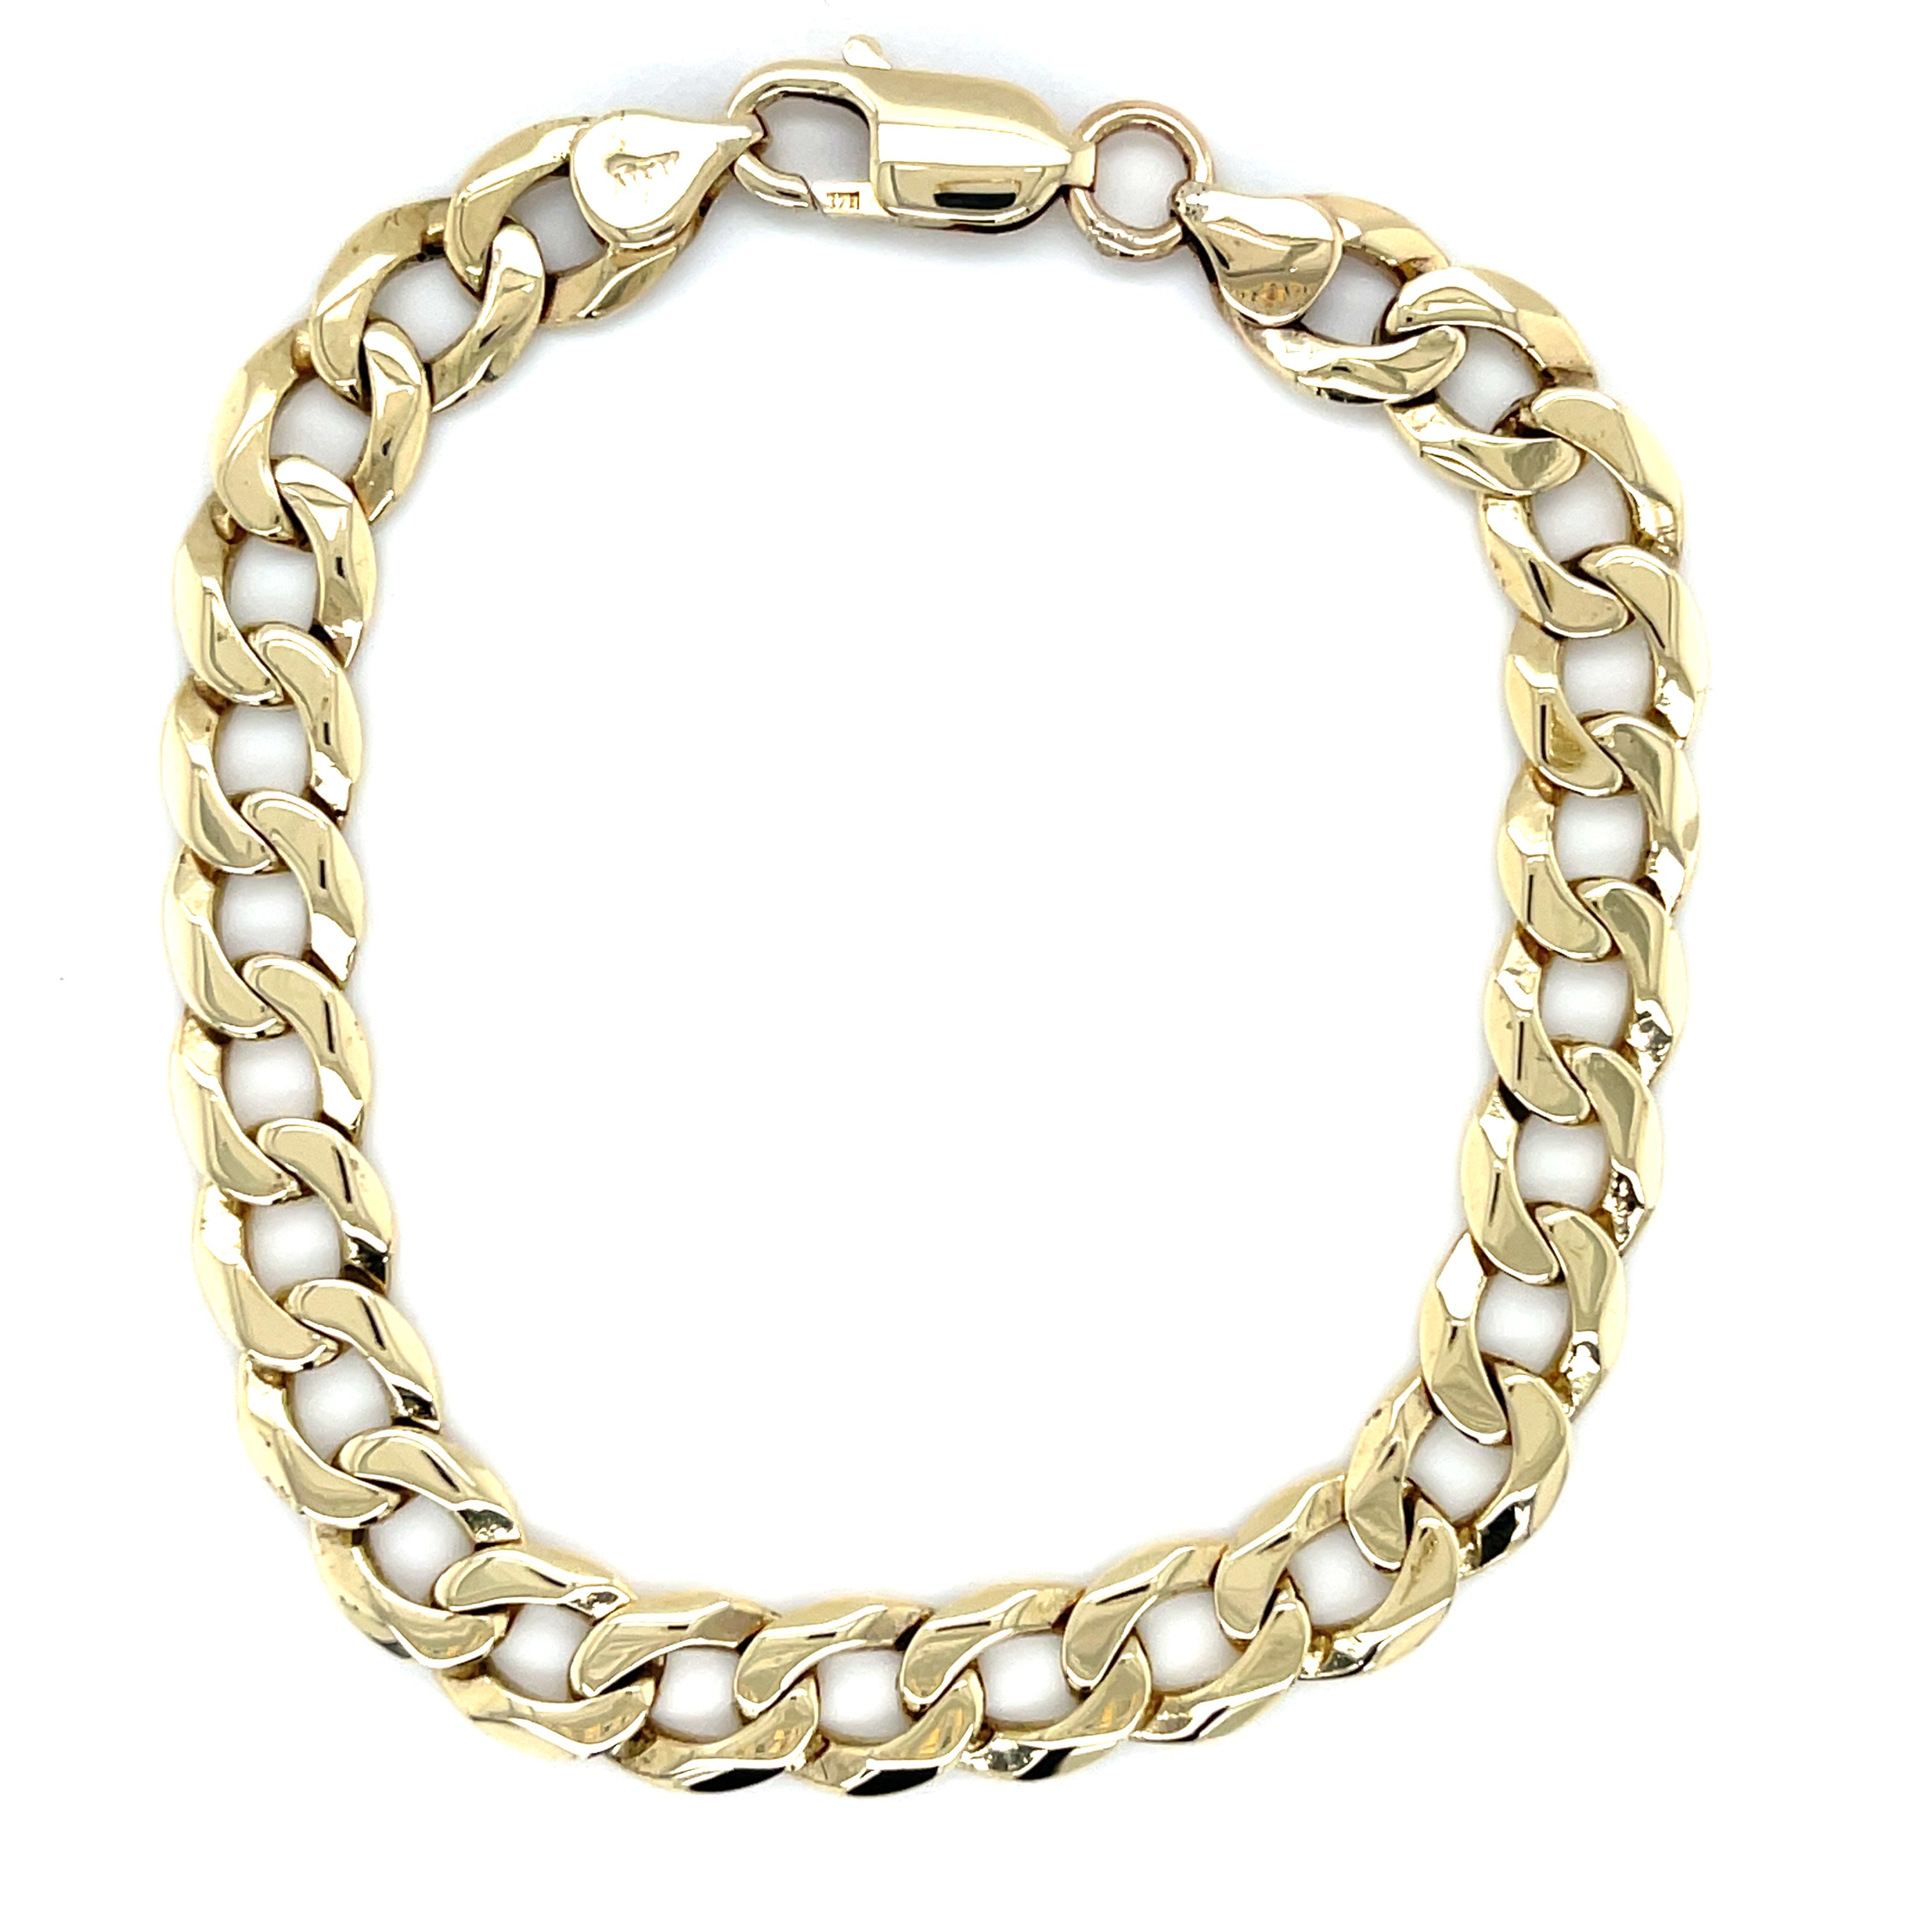 9ct Yellow Gold 8 Inch Curb Link Bracelet - 17.20g